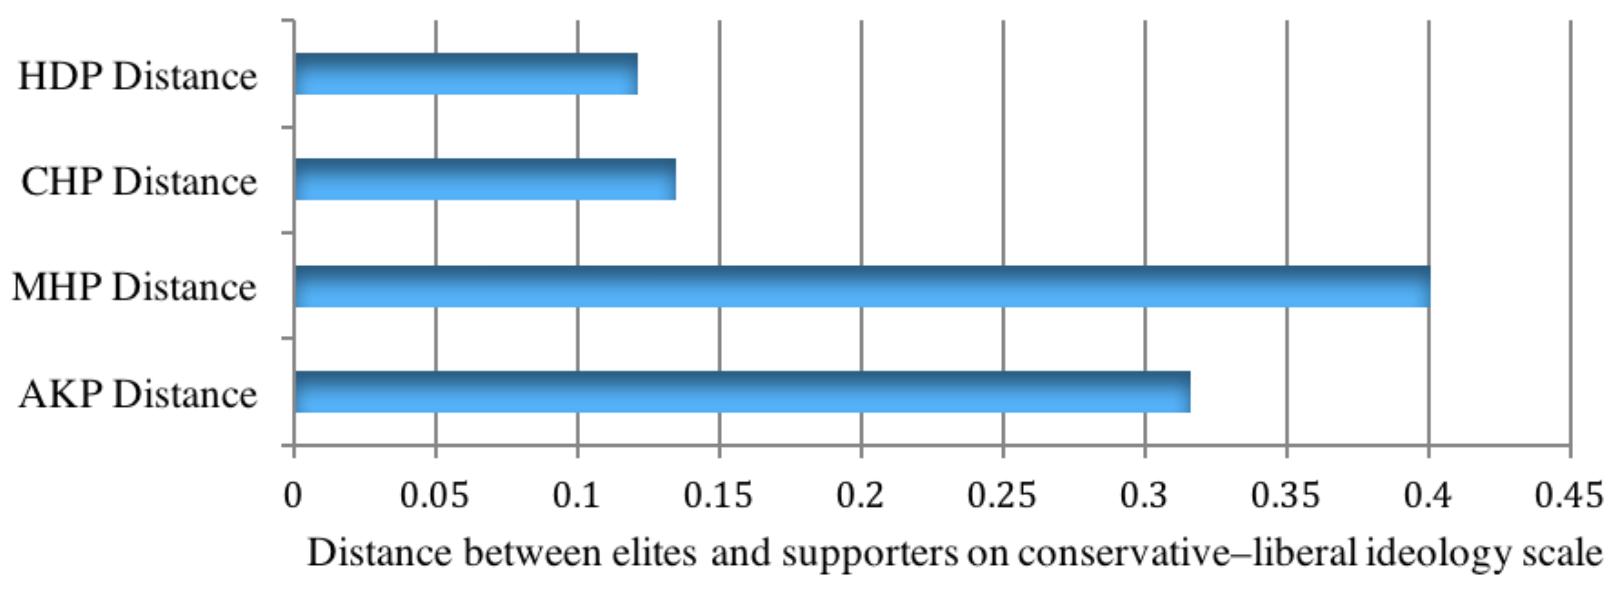 This graph compares the ideological distance between Turkish elites and supporters by party.